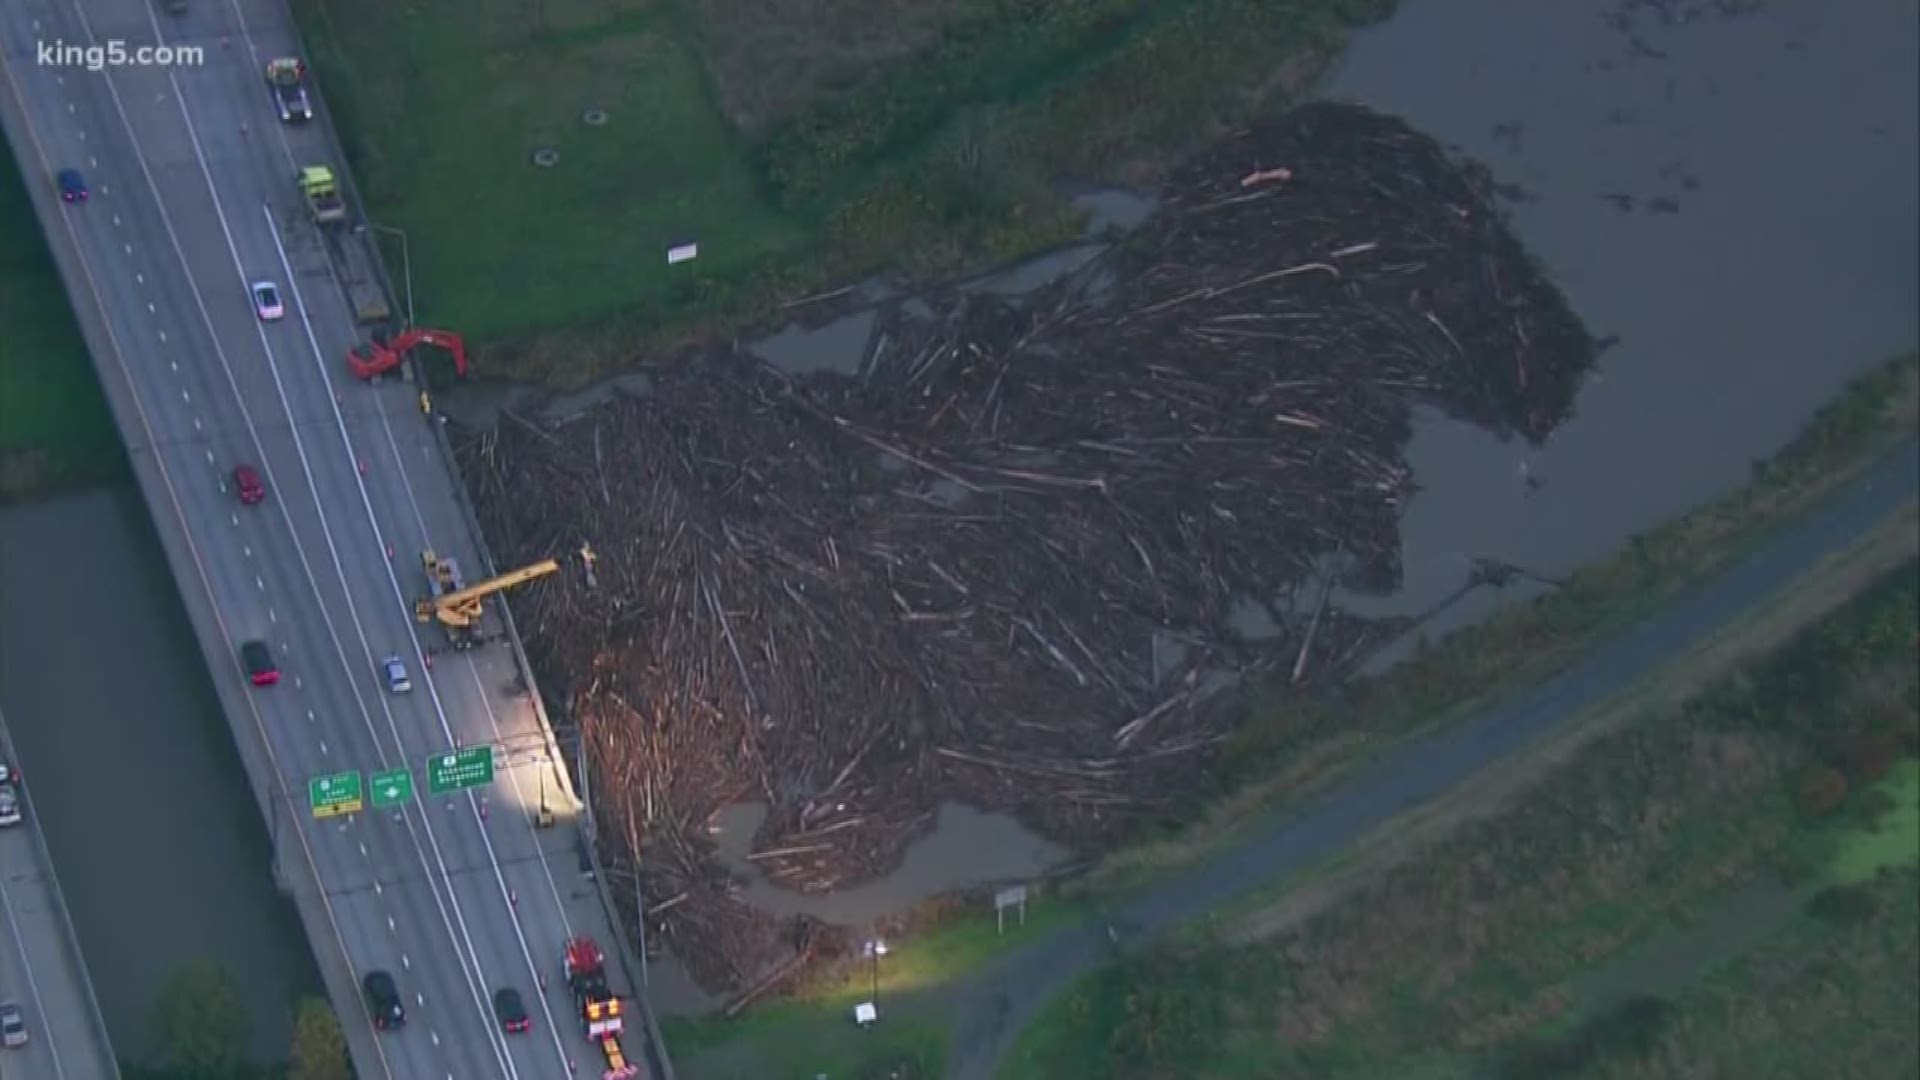 WSDOT said drivers should plan for delays through the Wednesday morning commute as their crews continue to clean up debris caused by a log jam.